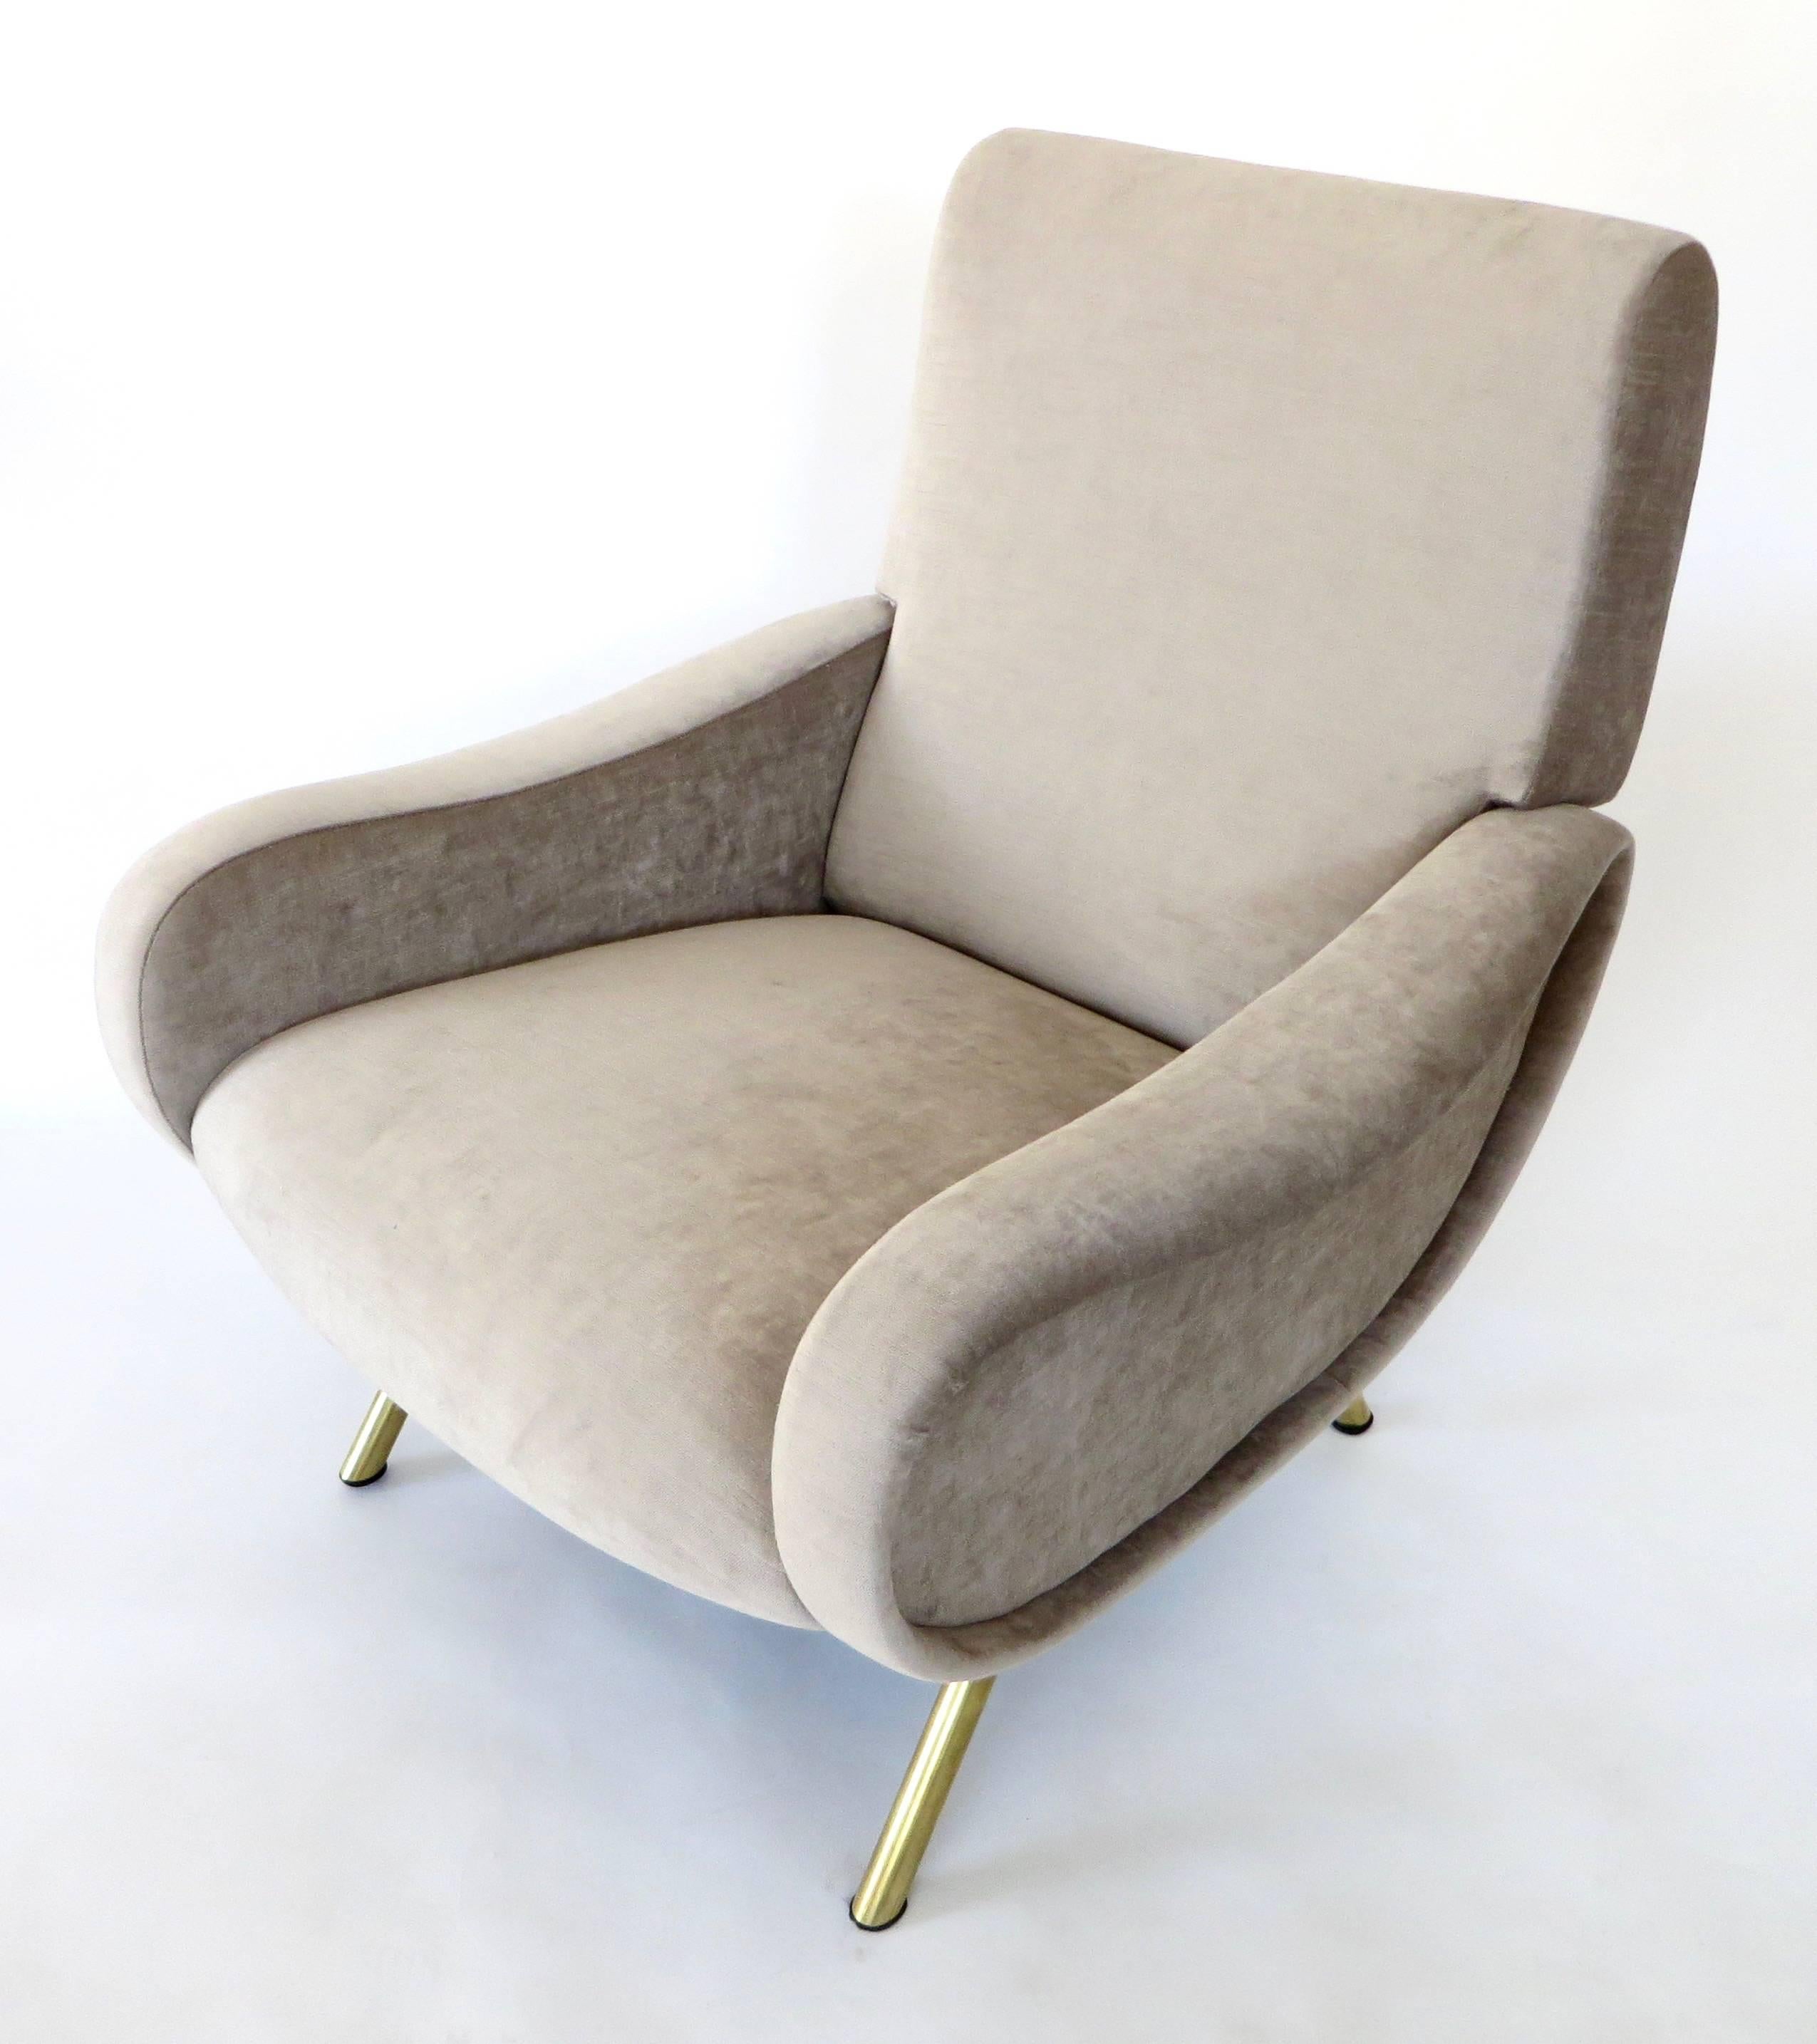 The lady chair was designed by Marco Zanuso for Arflex in 1951.
It won the award Medaglia d’oro or gold medal at the Milan IX Triennale in 1951.
Newly restored and reupholstered in Romo velvet, original brass legs.
Overall size: 30